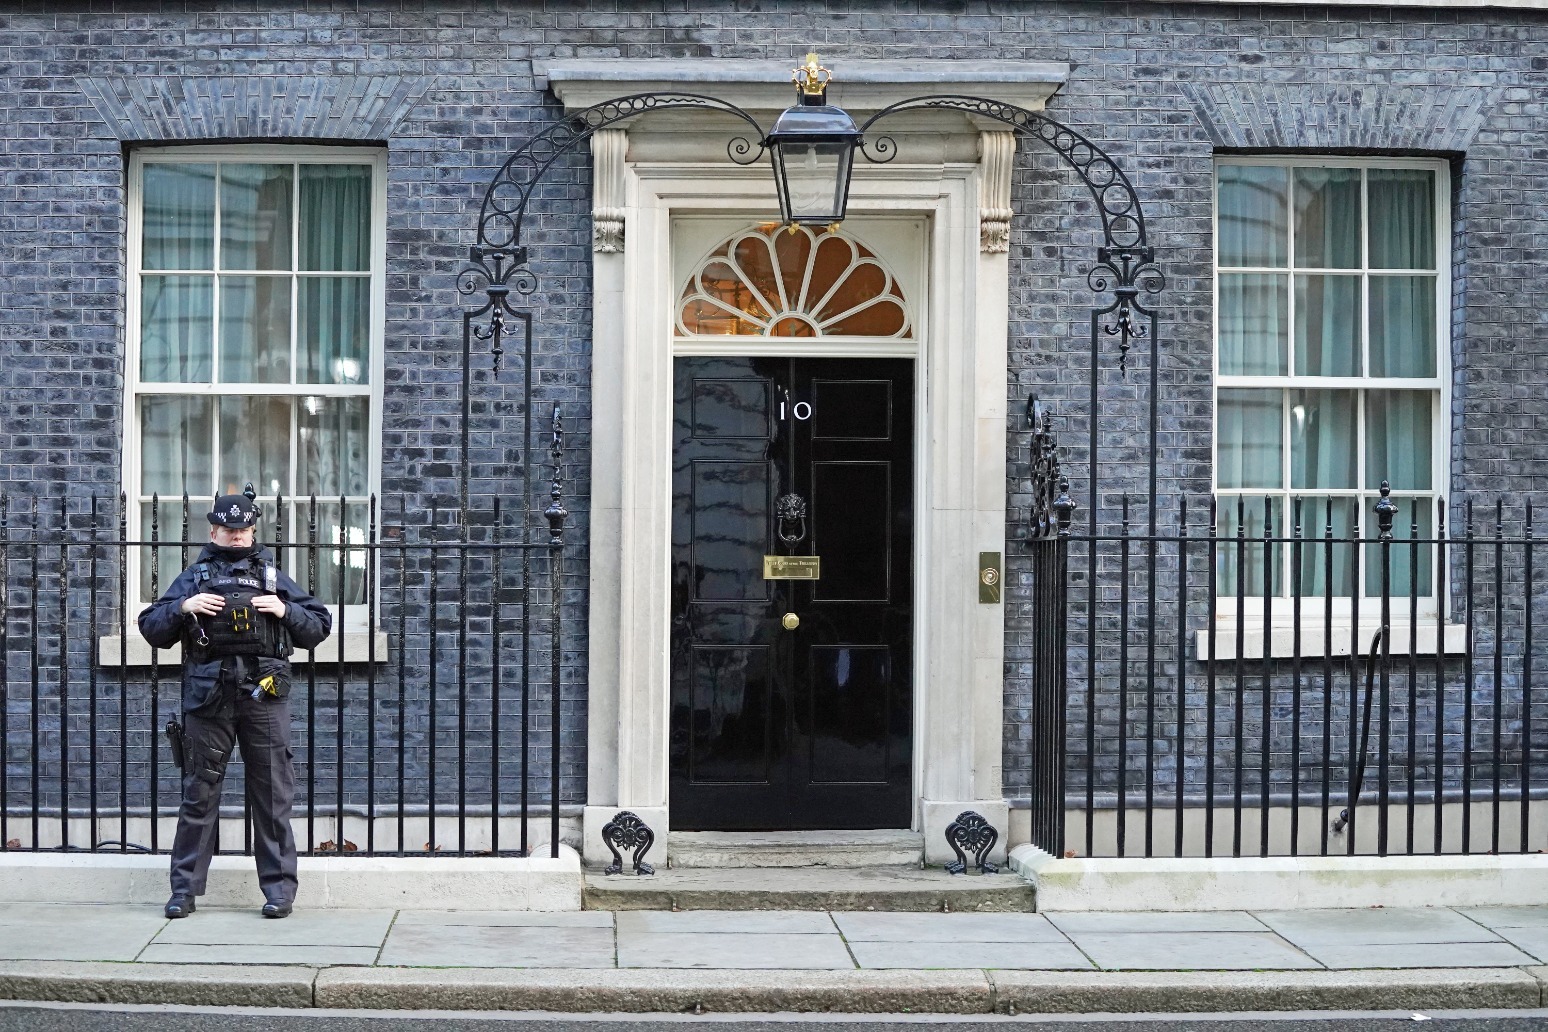 The race to become Britains next Prime Minister gets underway